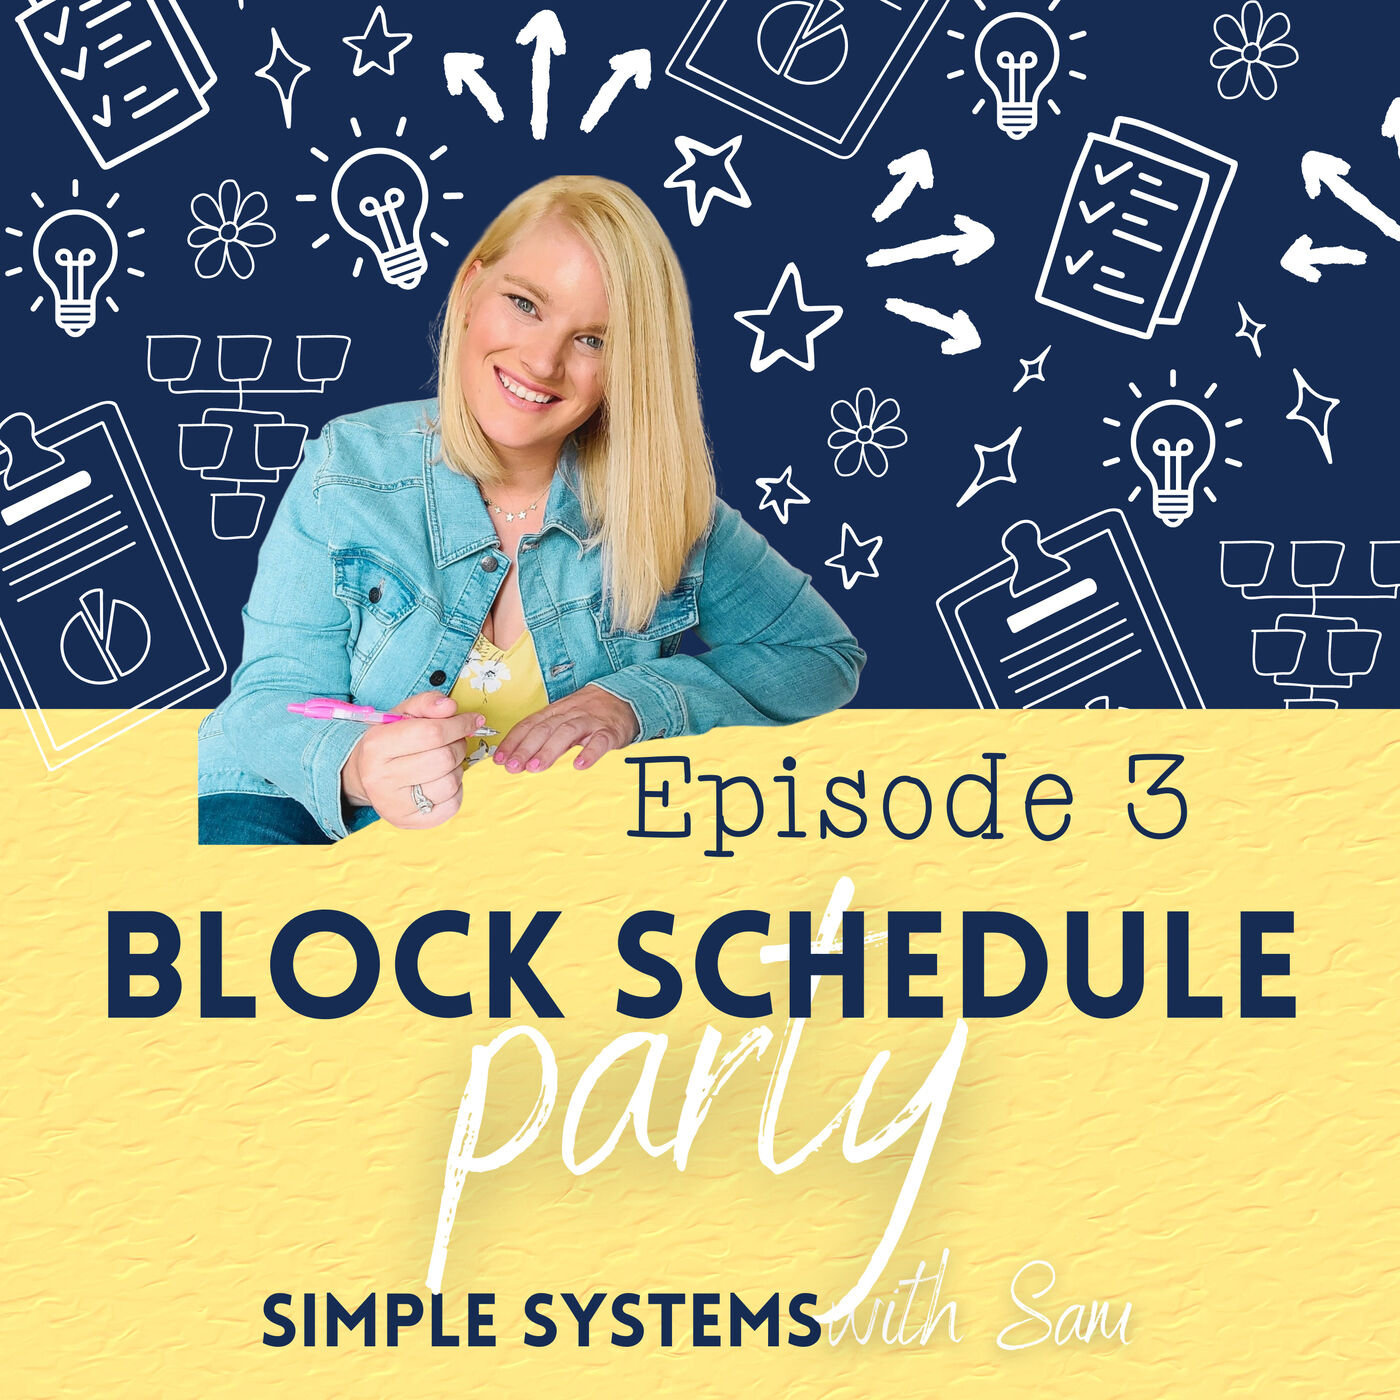 Artwork for podcast Simple Systems with Sam